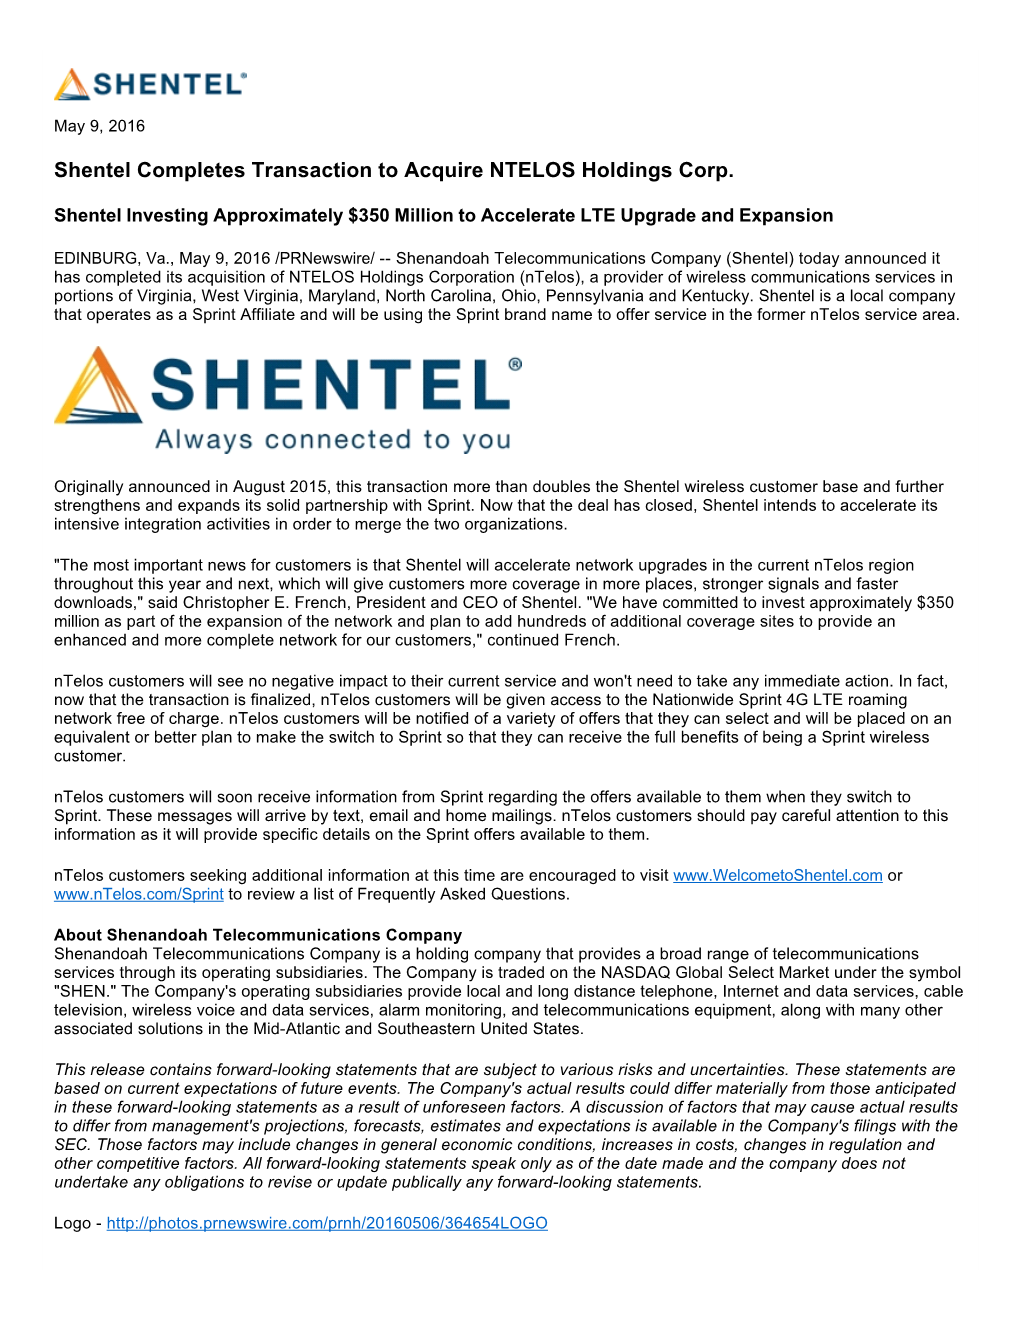 Shentel Completes Transaction to Acquire NTELOS Holdings Corp